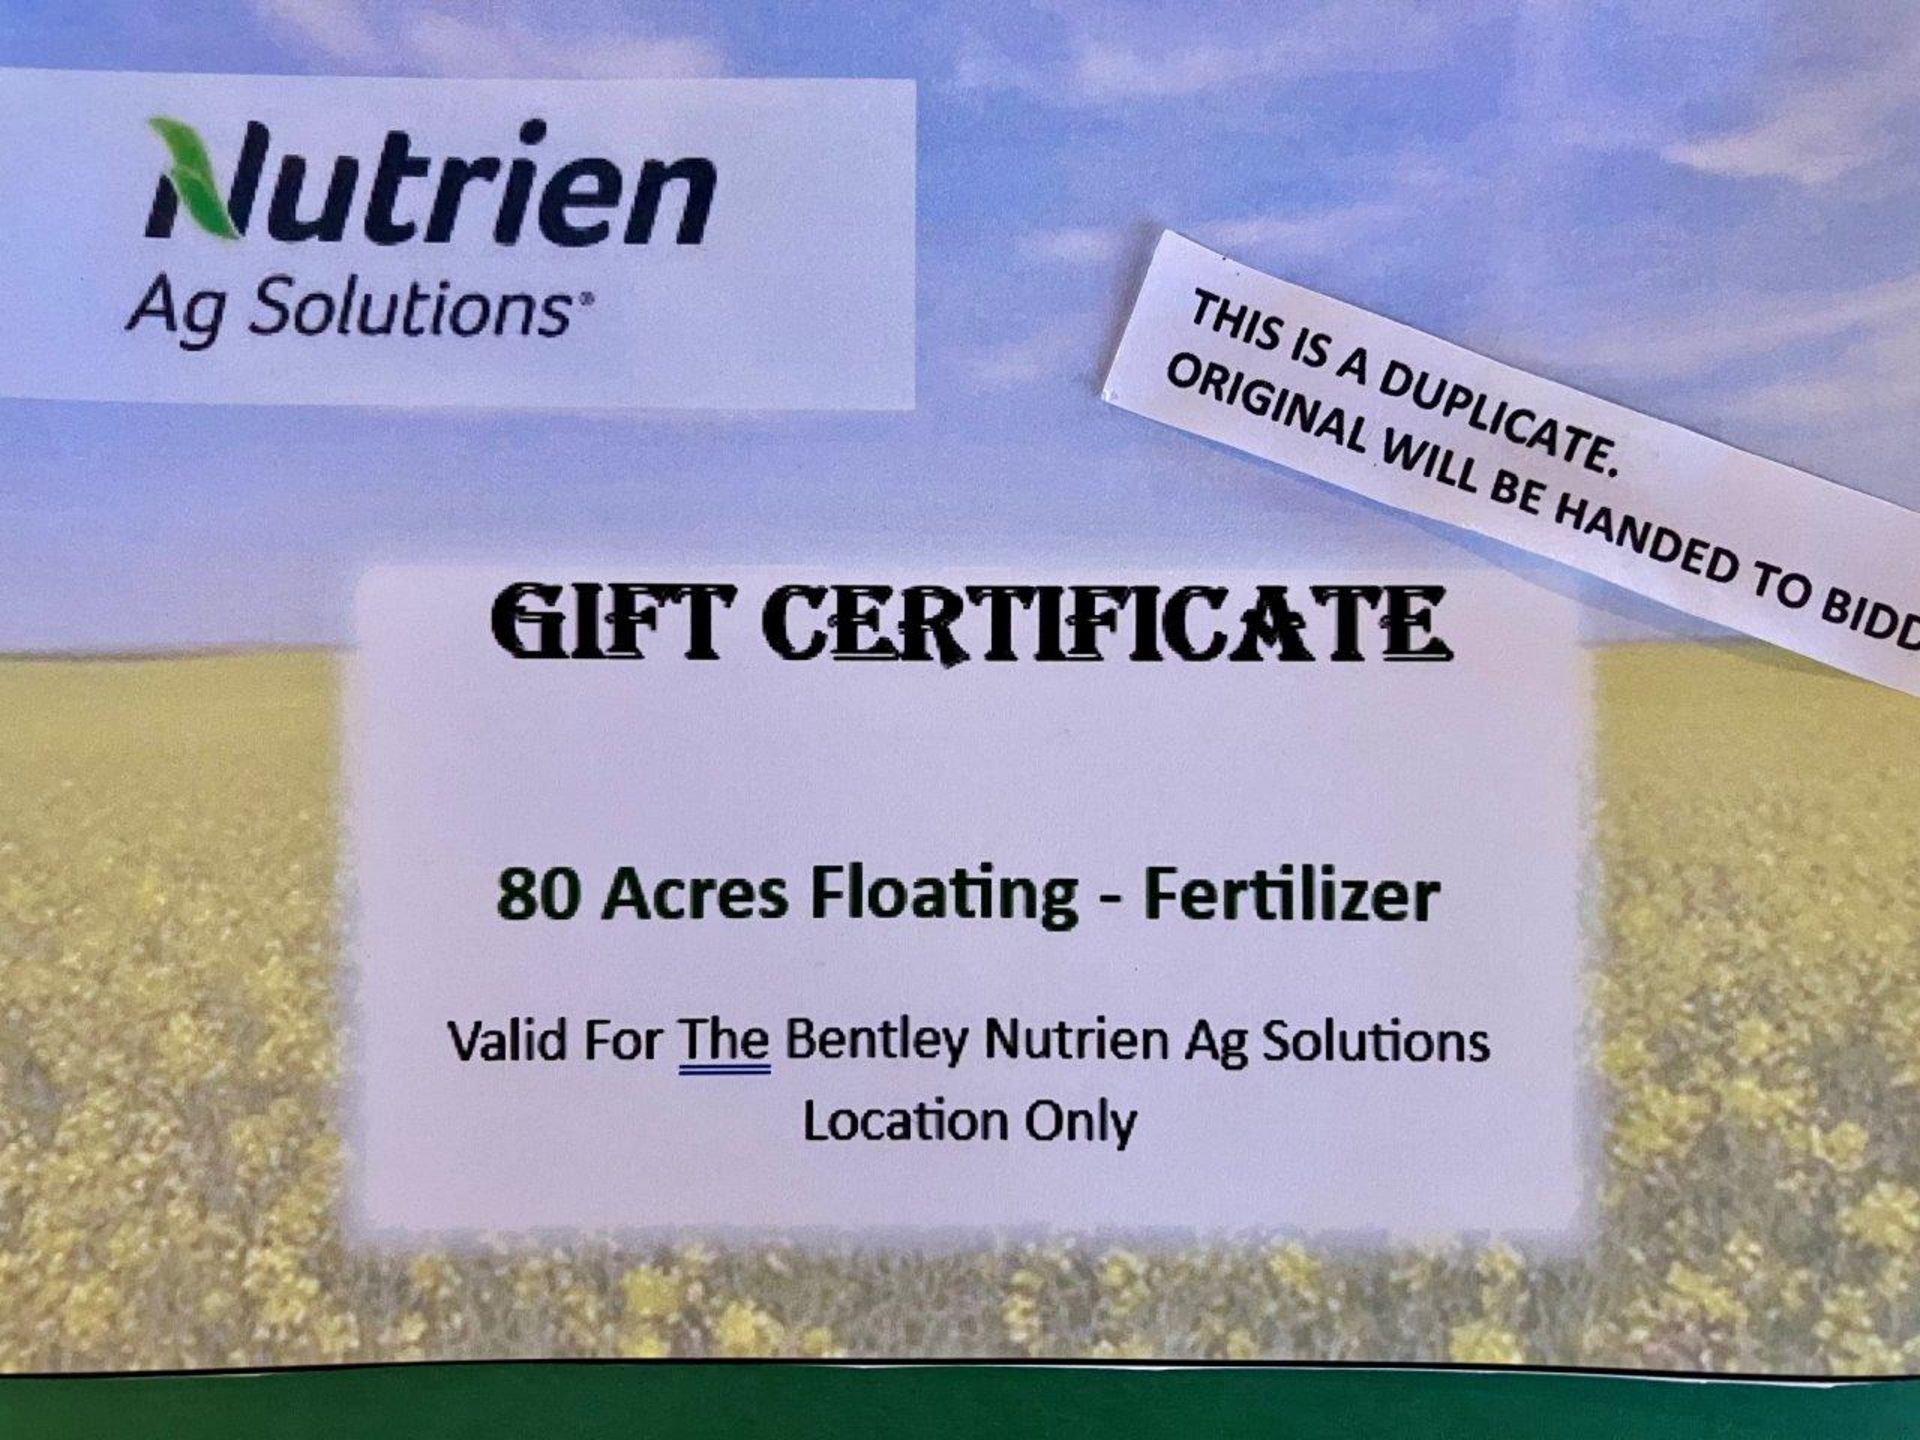 80 ACRES OF CUSTOM FLOATING GIFT CERTIFICATE - Image 2 of 2